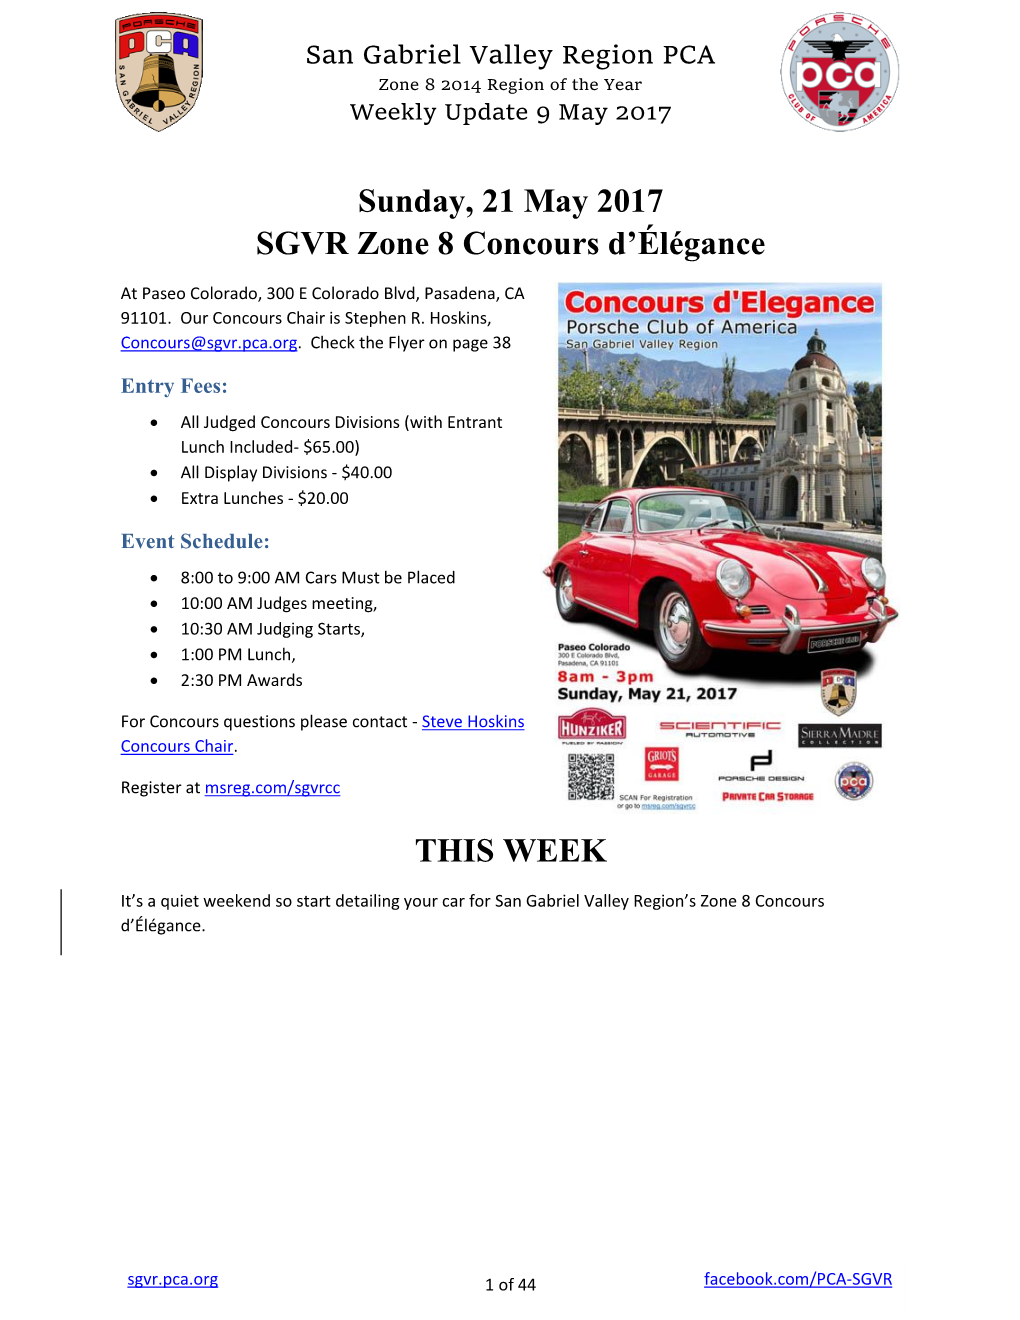 Sunday, 21 May 2017 SGVR Zone 8 Concours D'élégance THIS WEEK